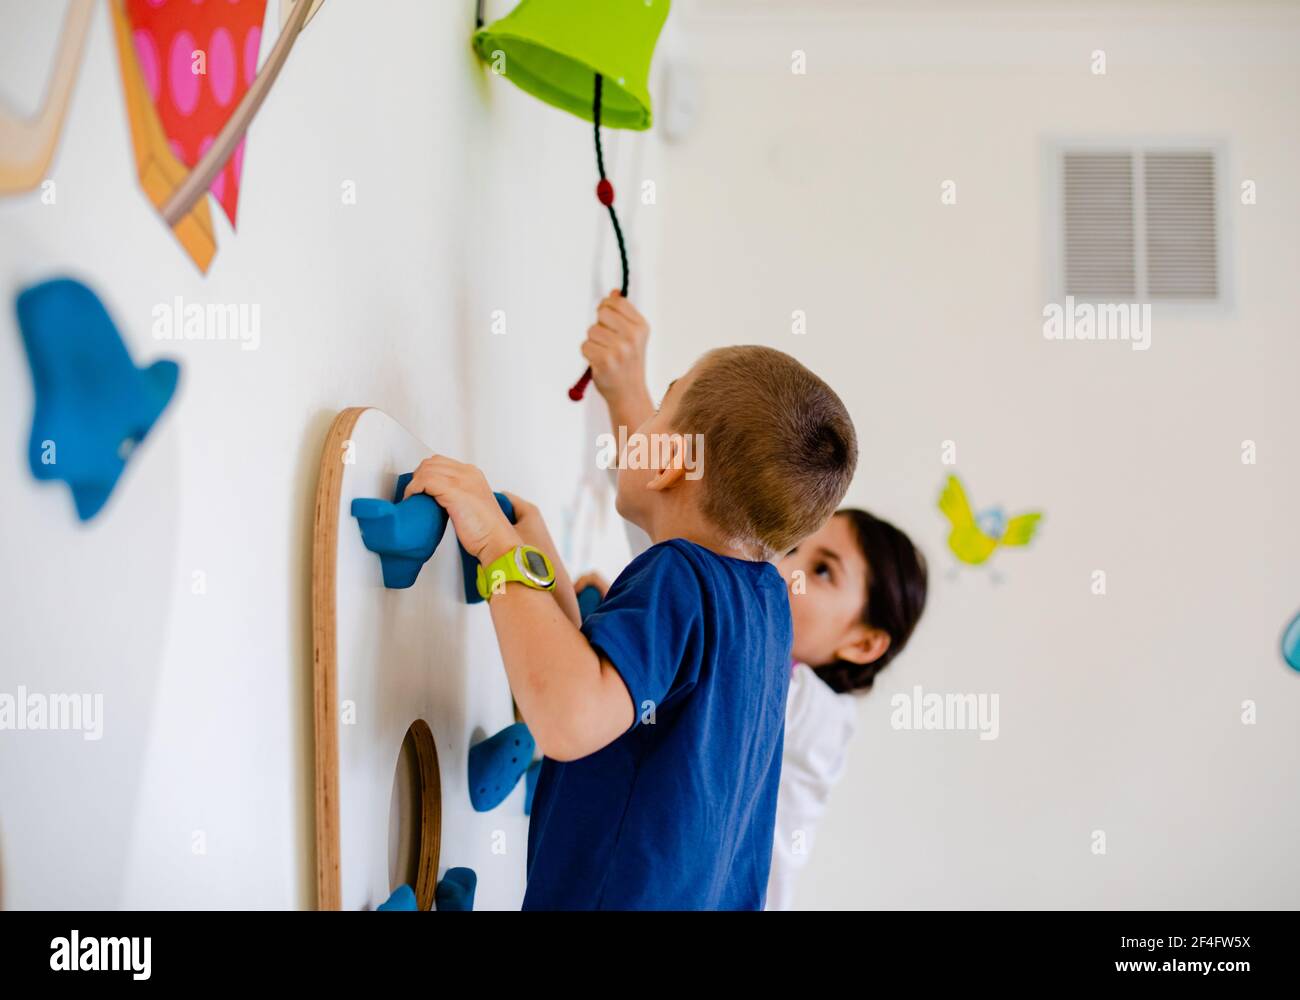 The kids play a dexterity game are climbing a wall Stock Photo